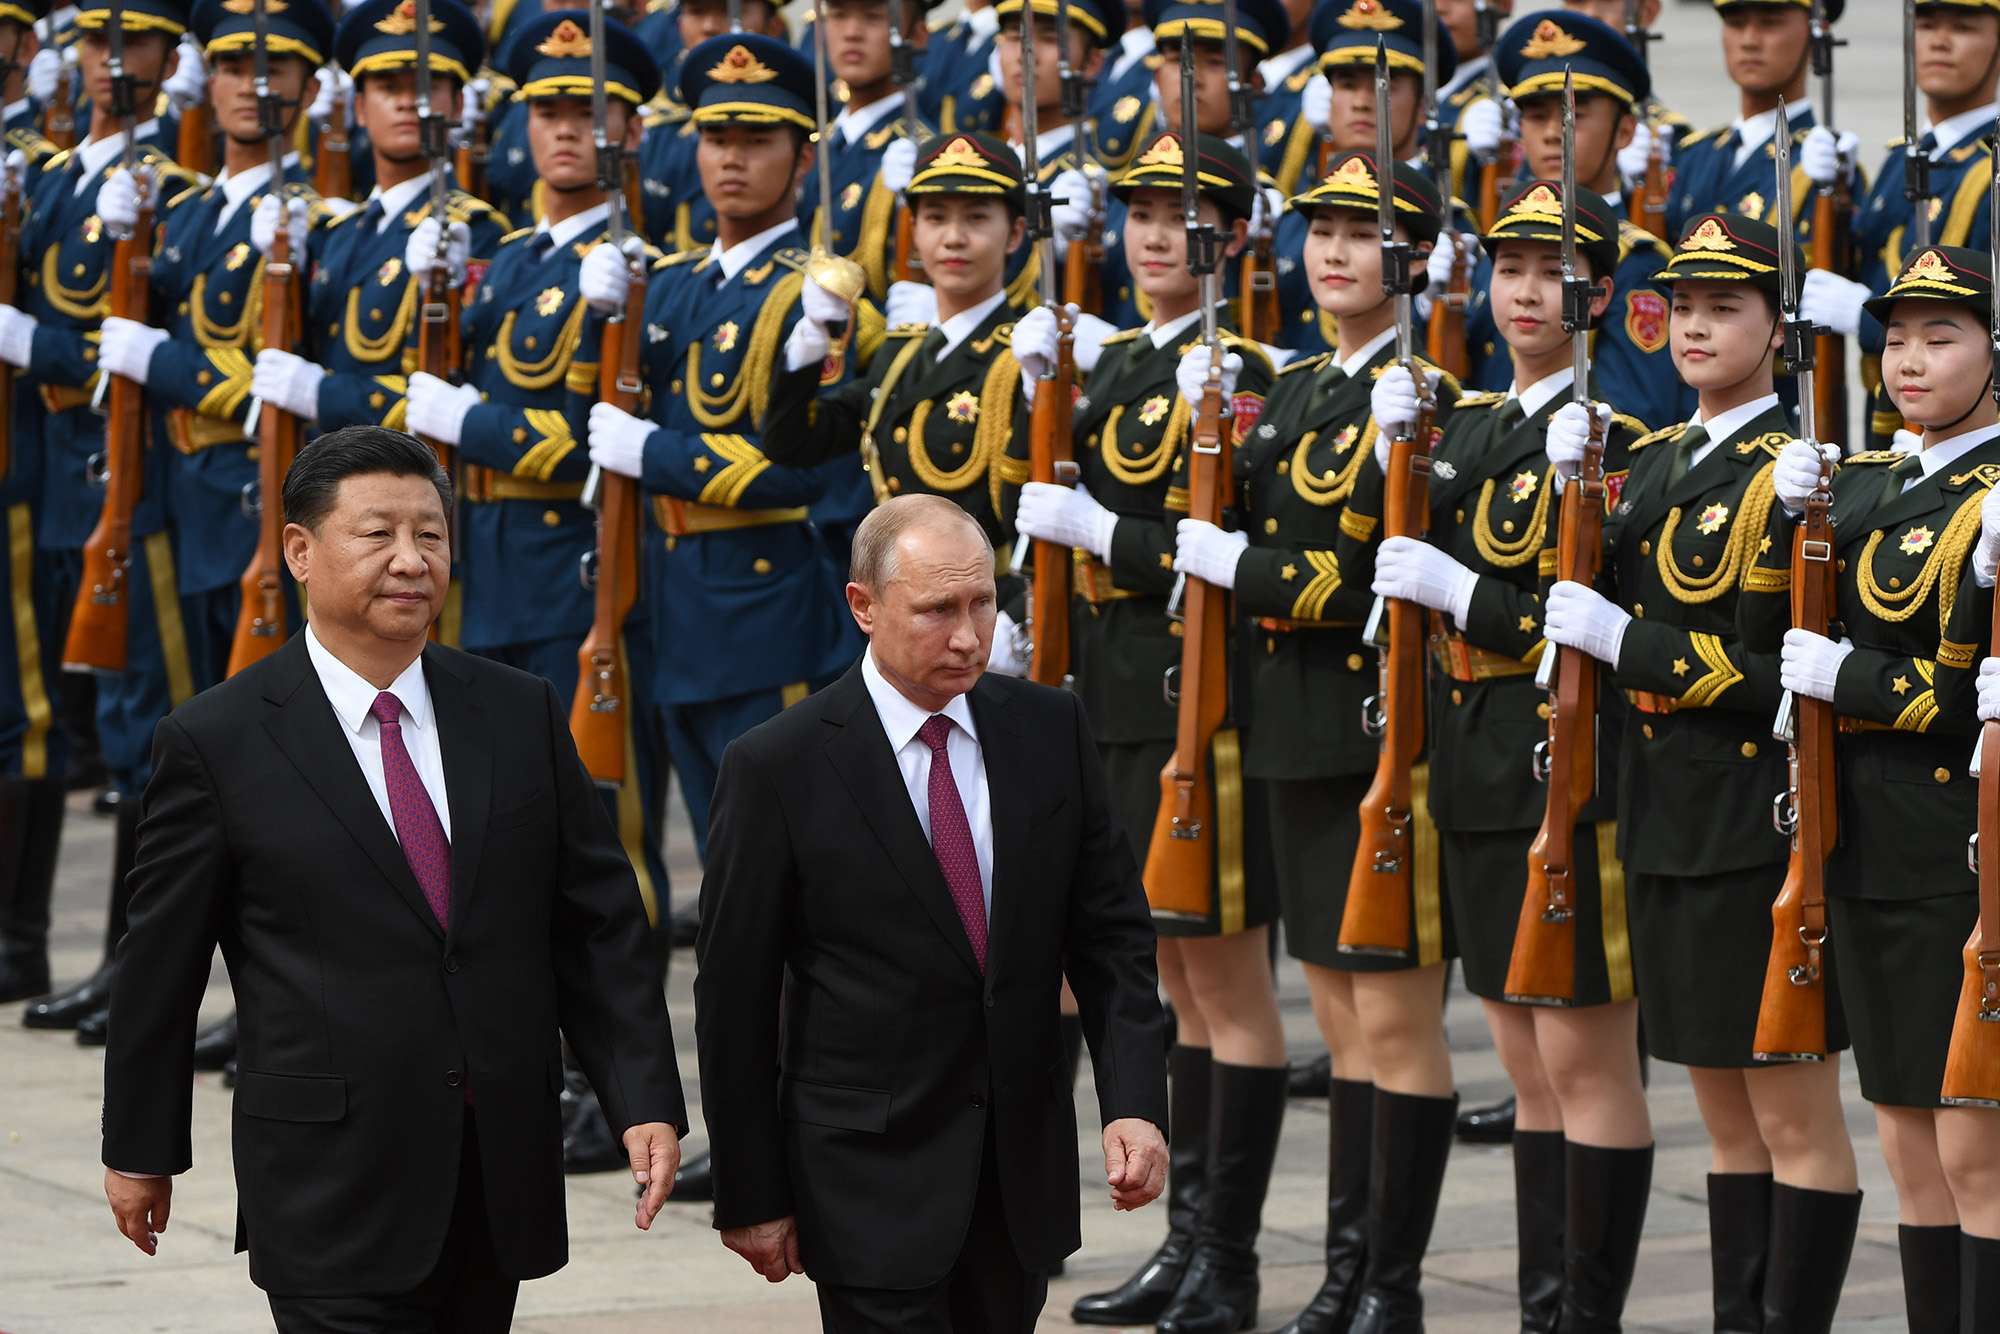 Russian President Vladimir Putin reviews a military honor guard with Chinese leader Xi Jinping during a welcoming ceremony outside the Great Hall of the People in Beijing on June 8, 2018. 